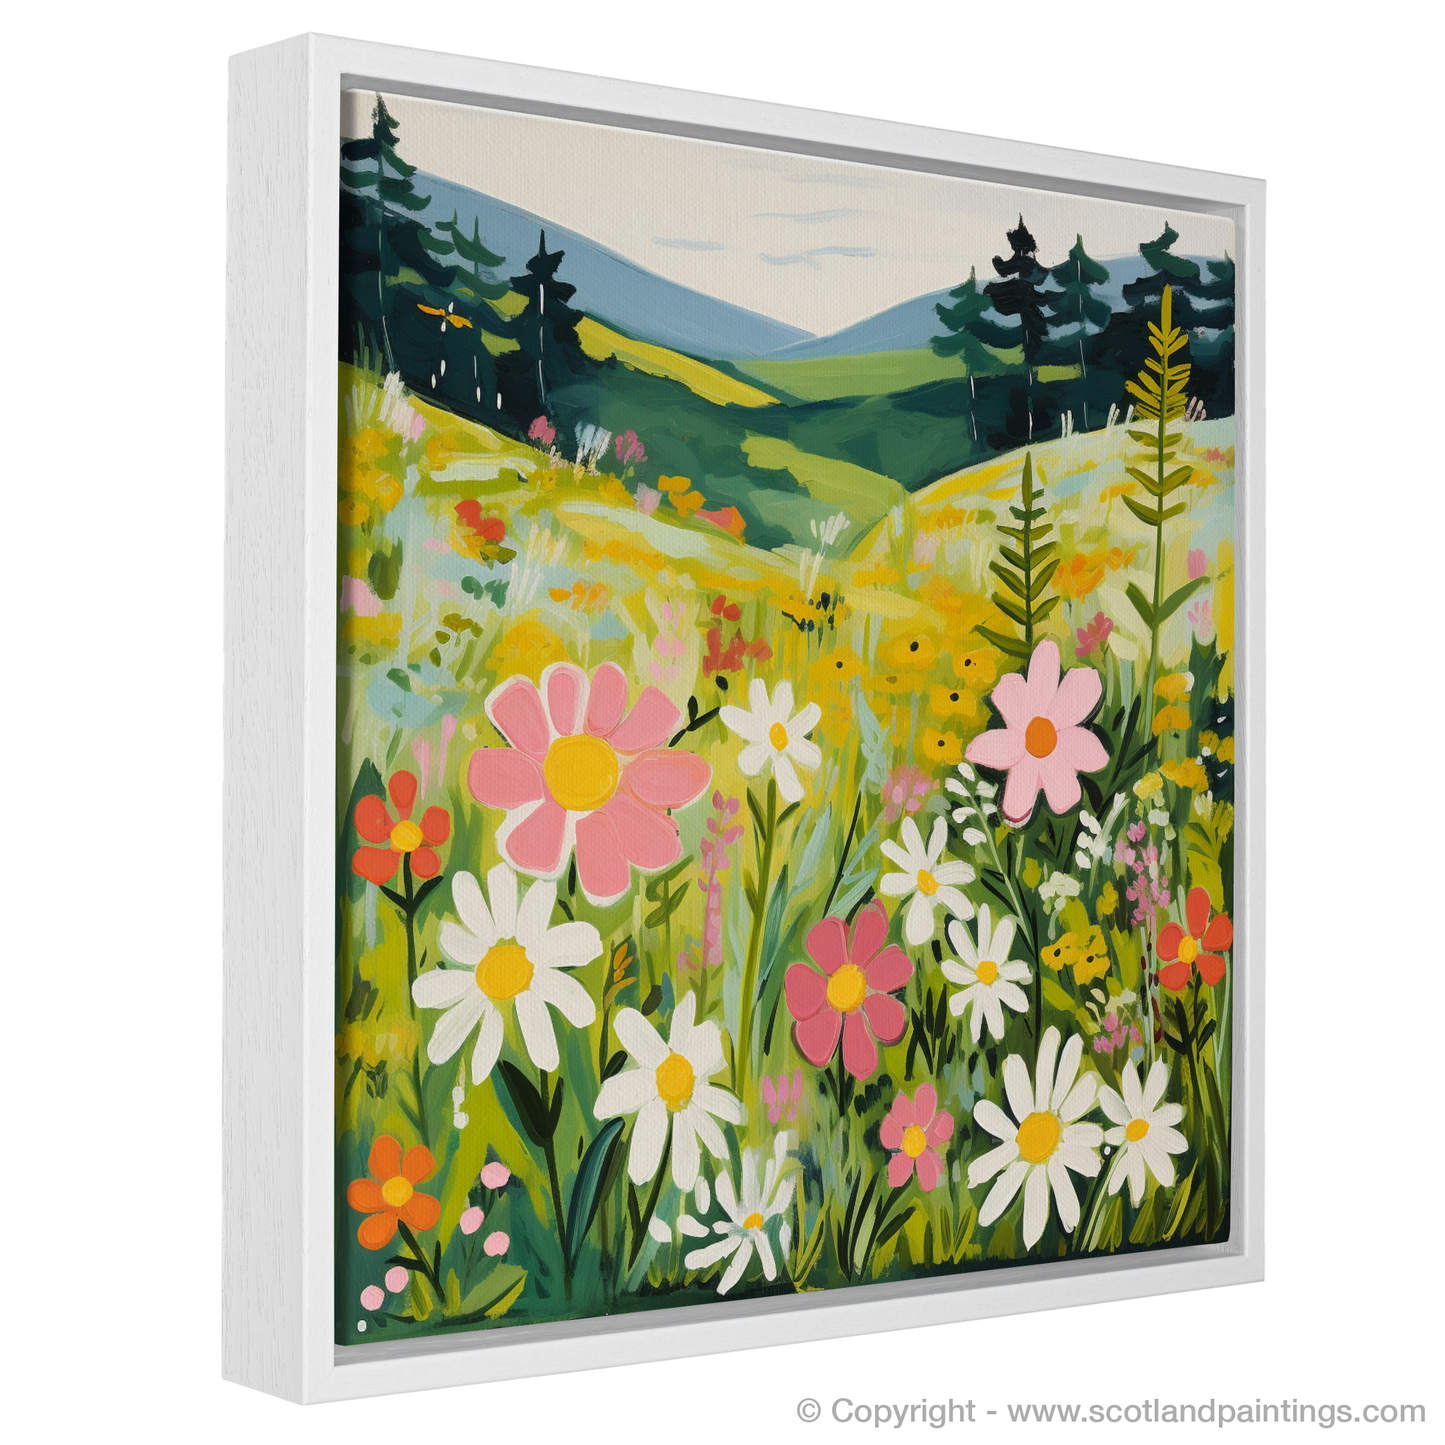 Enchanted Meadow: A Naive Art Tribute to Galloway Forest Park Flora